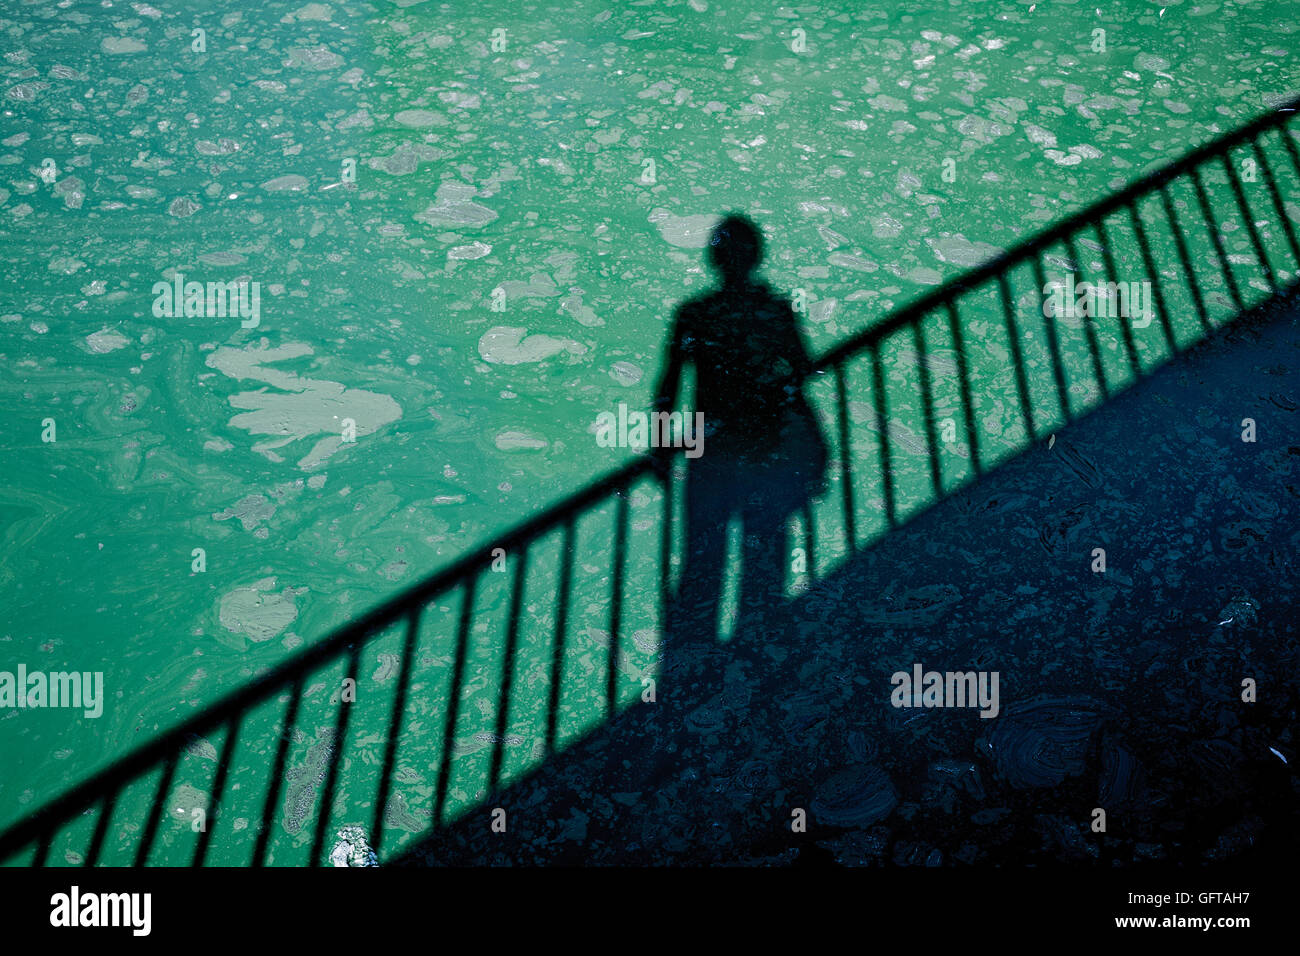 A man casting shadow on dirty green toxic water contaminated with algae Stock Photo